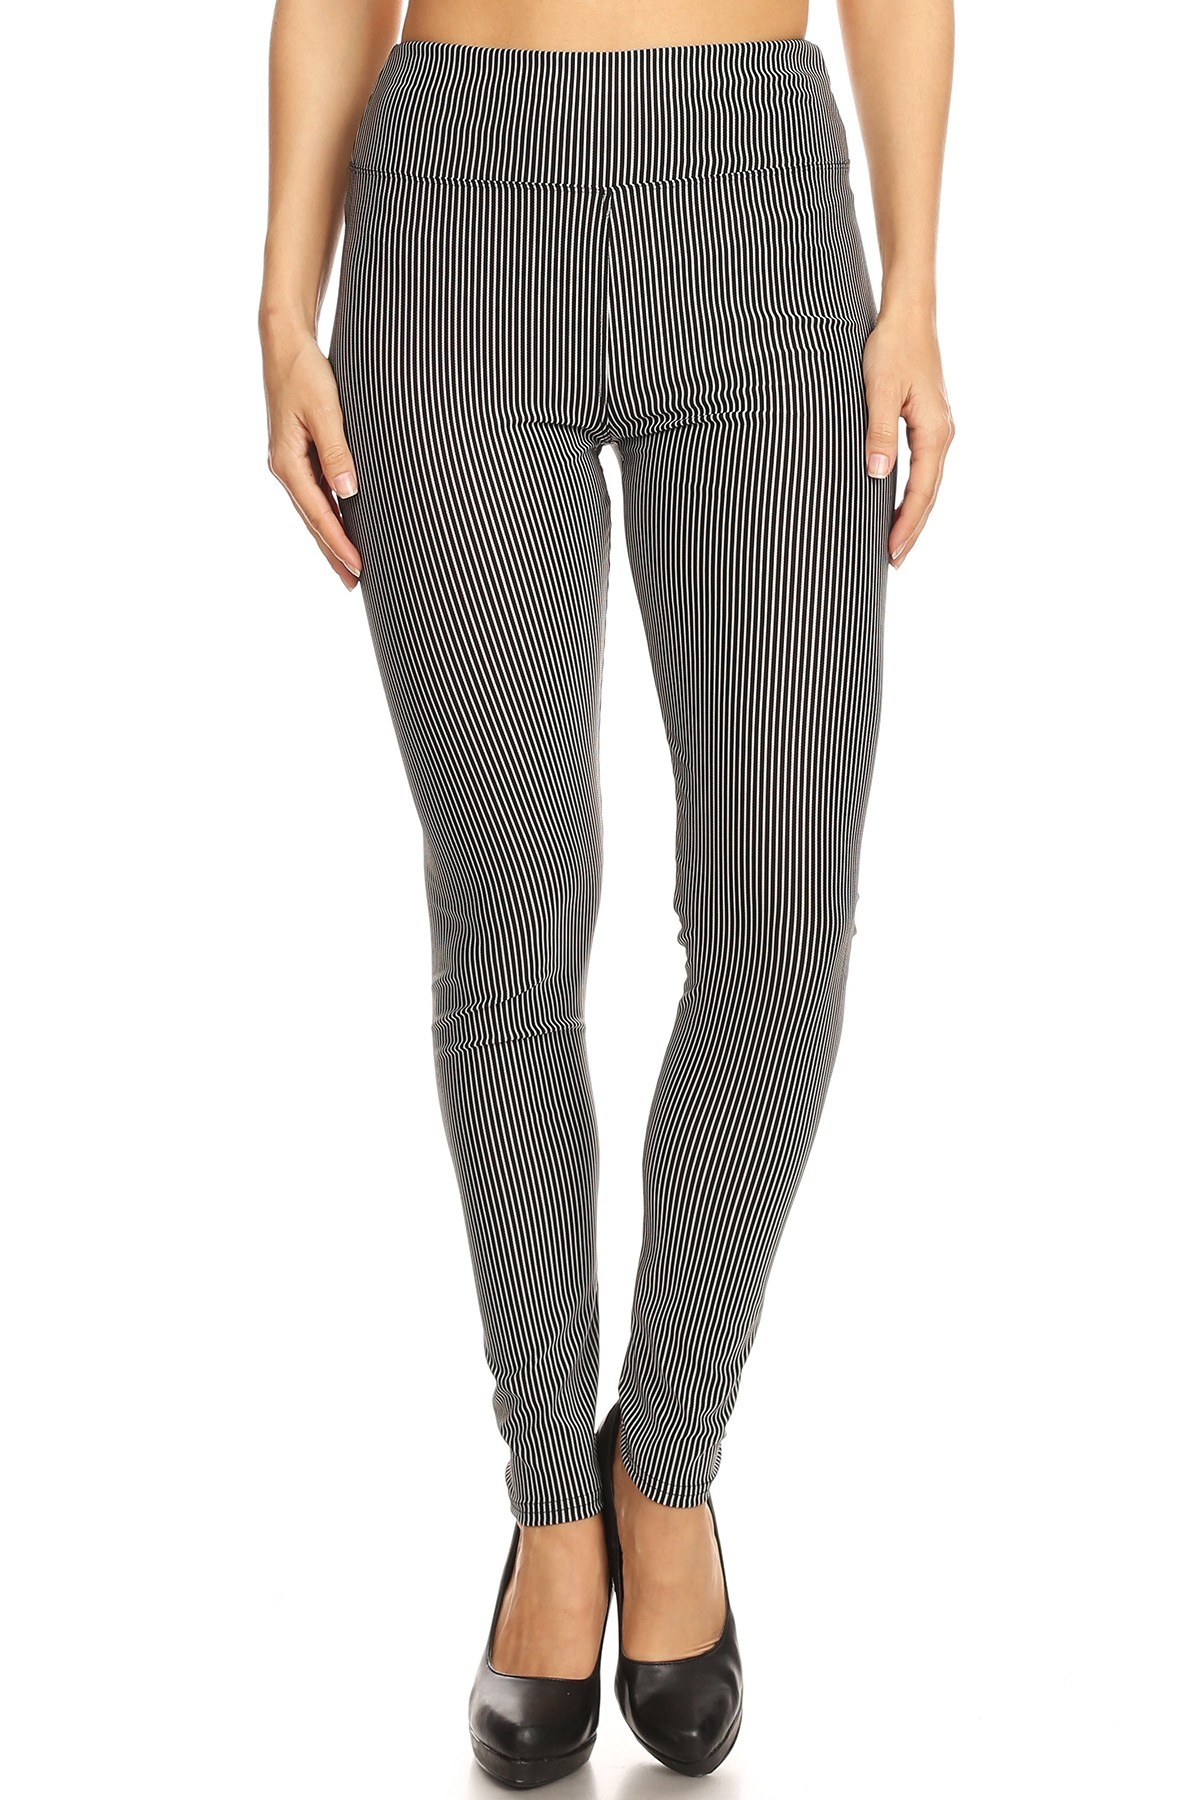 Wholesale White Stripe Accent High Waisted Leggings - Thin